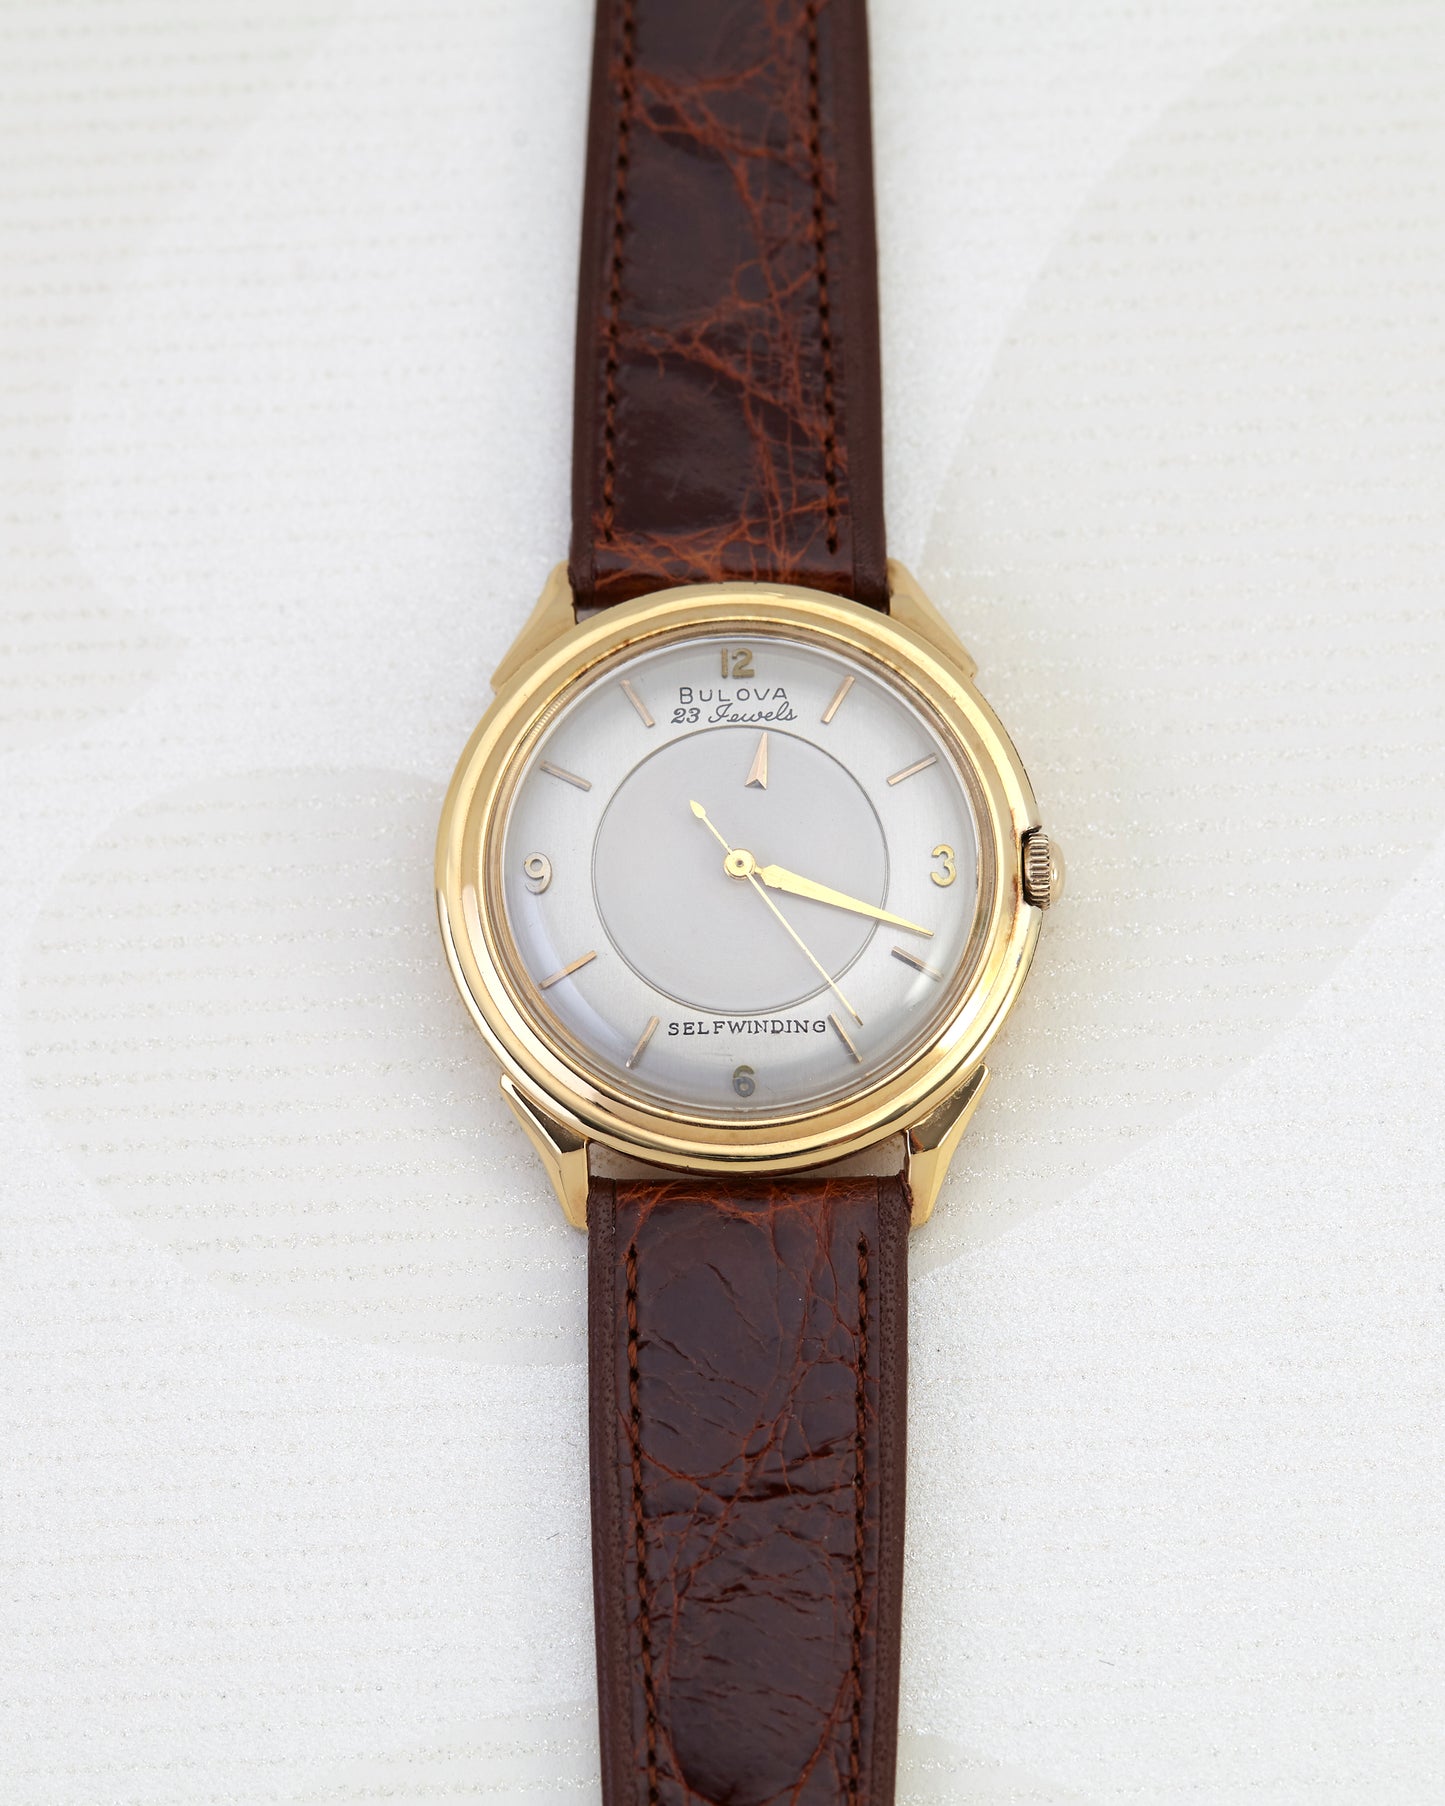 Bulova Mystery Hour Sweep Second Automatic Vintage Wristwatch